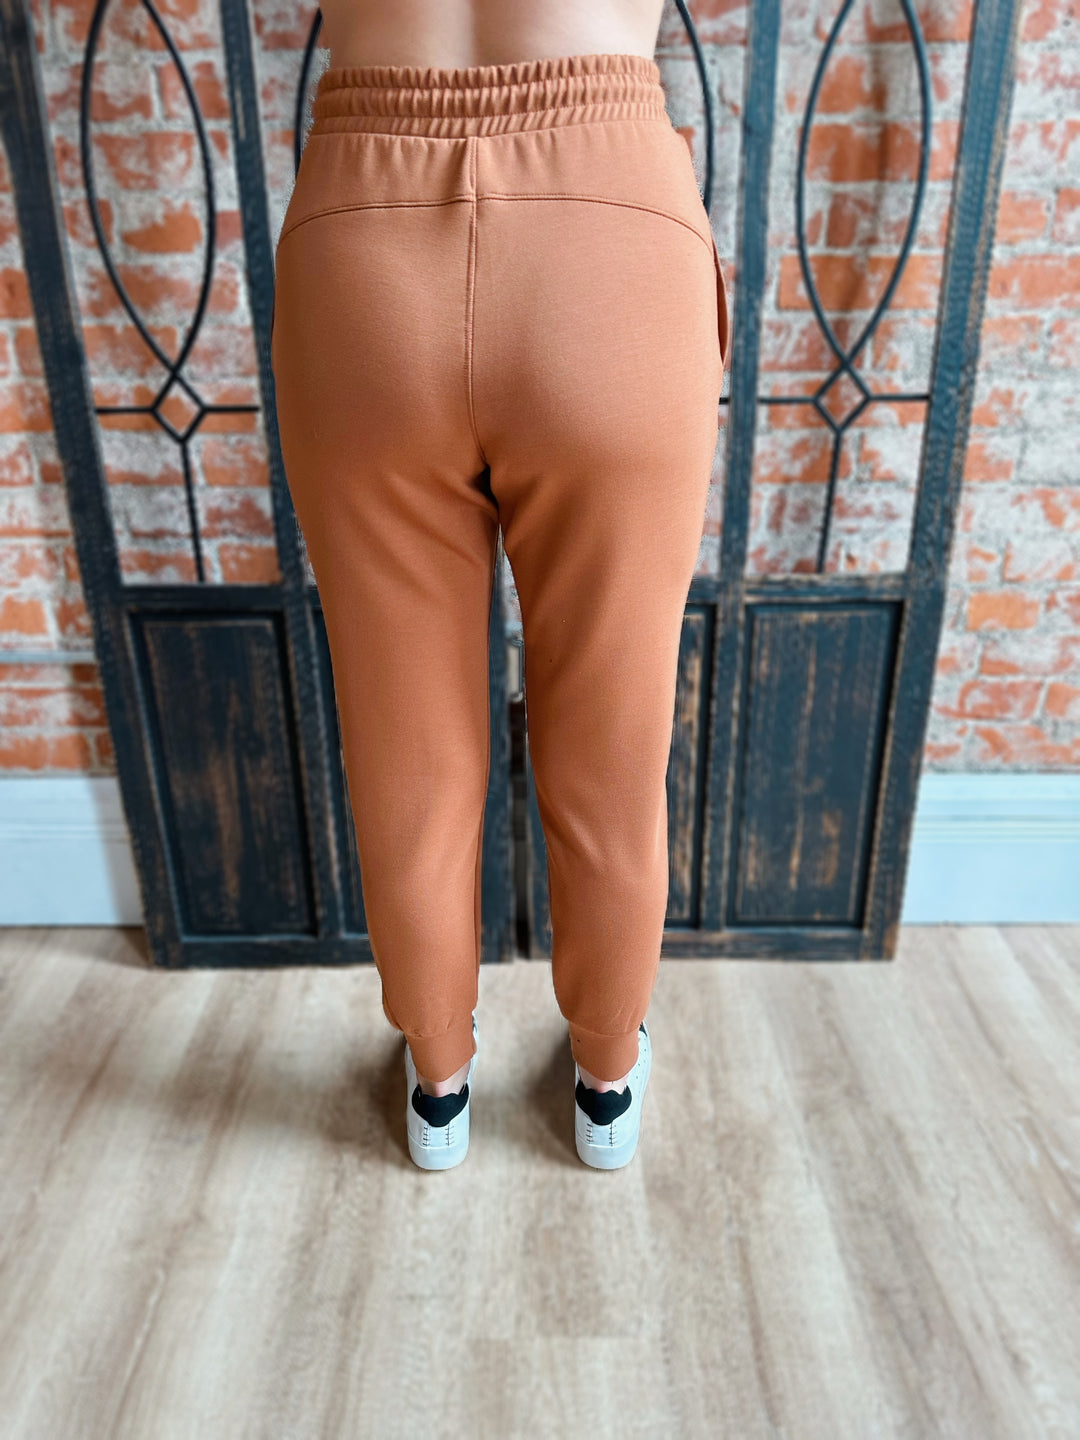 Around The Fire Camel Sweatpants